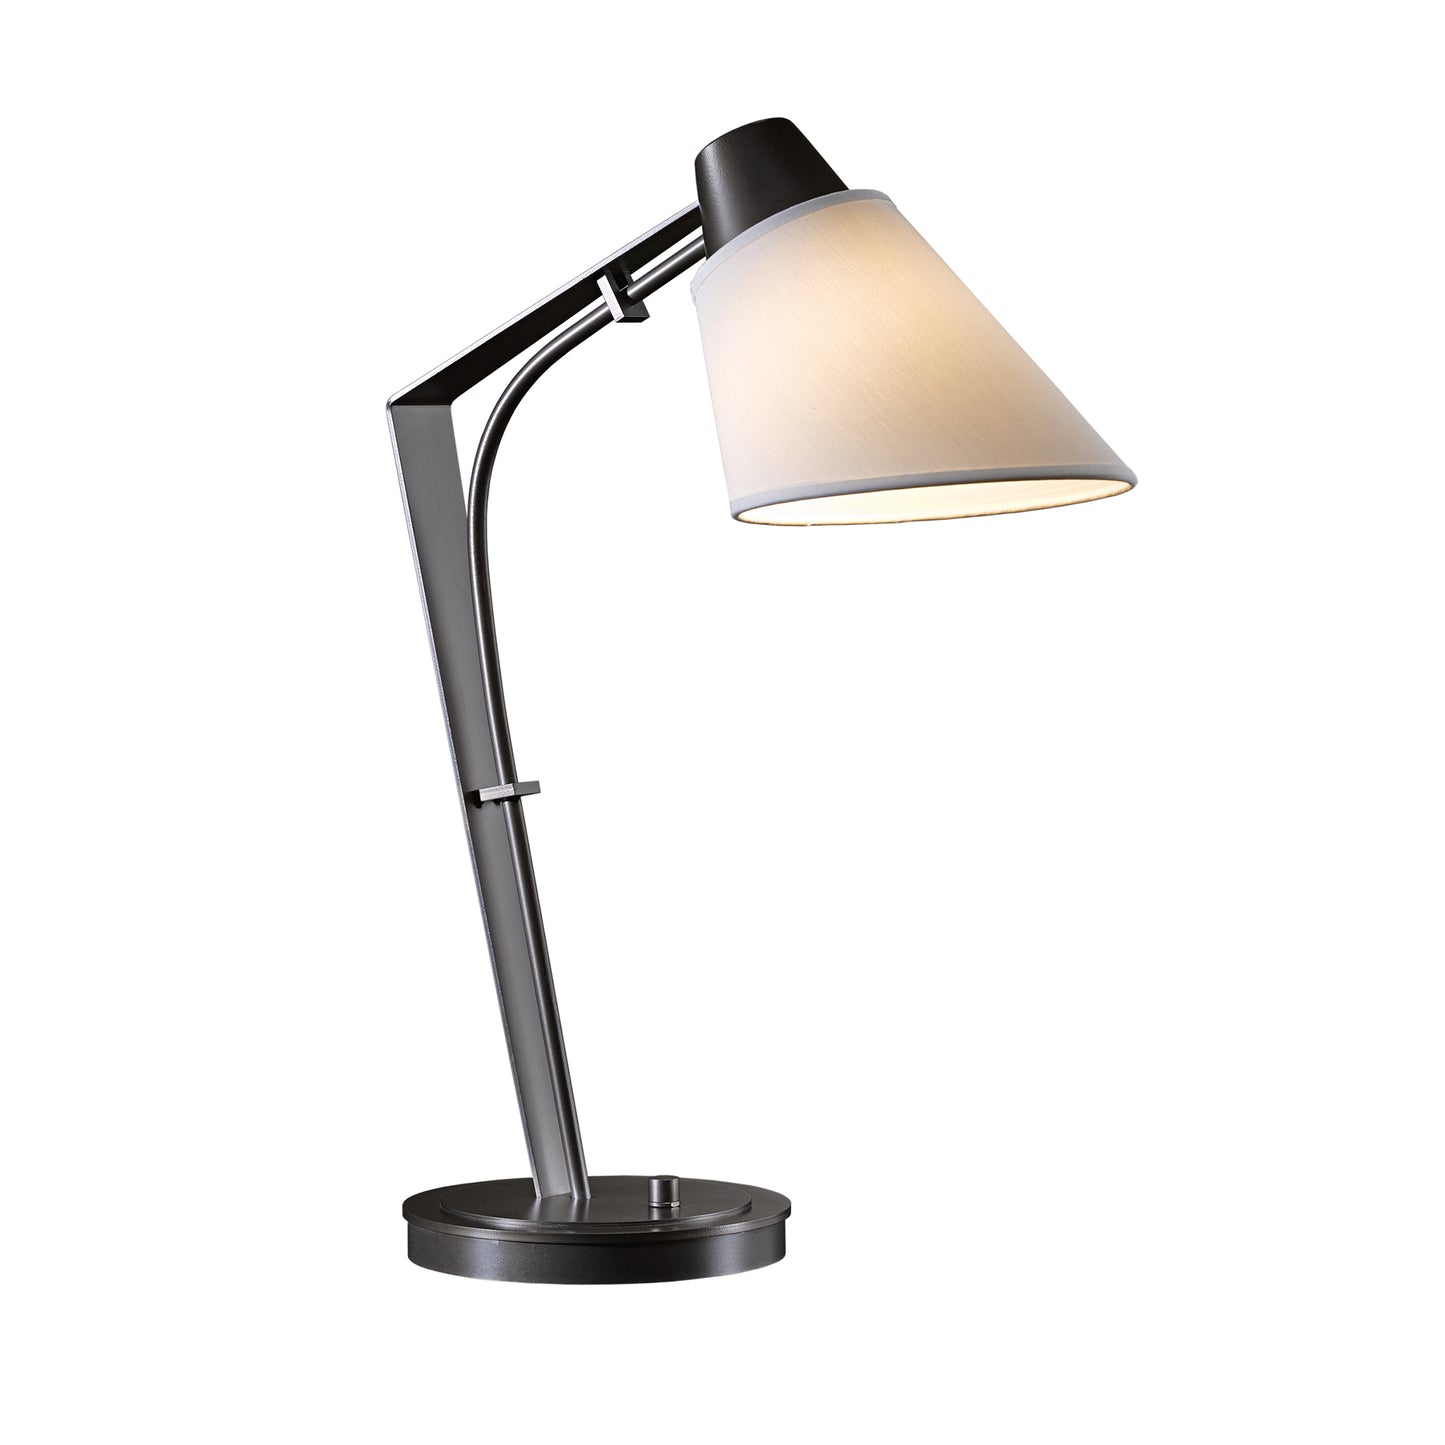 A Hubbardton Forge Reach Table Lamp with a hand-forged wrought iron base and adjustable arm, topped with a conical, light-colored lampshade, isolated on a white background.